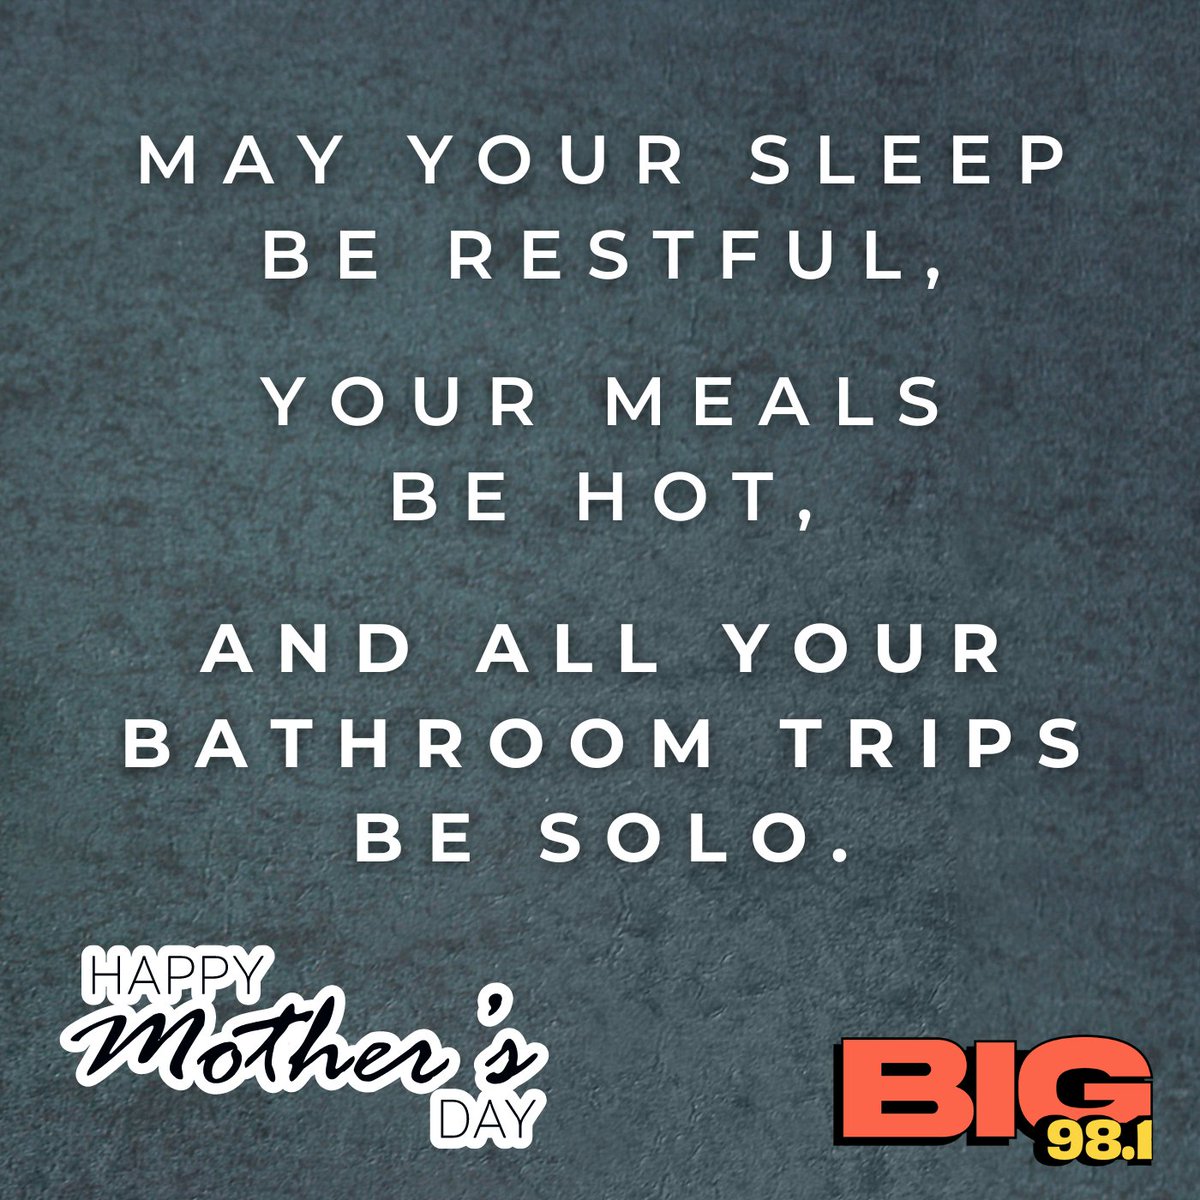 Happy #MothersDay to all the moms out there! ❤️ #BIG981